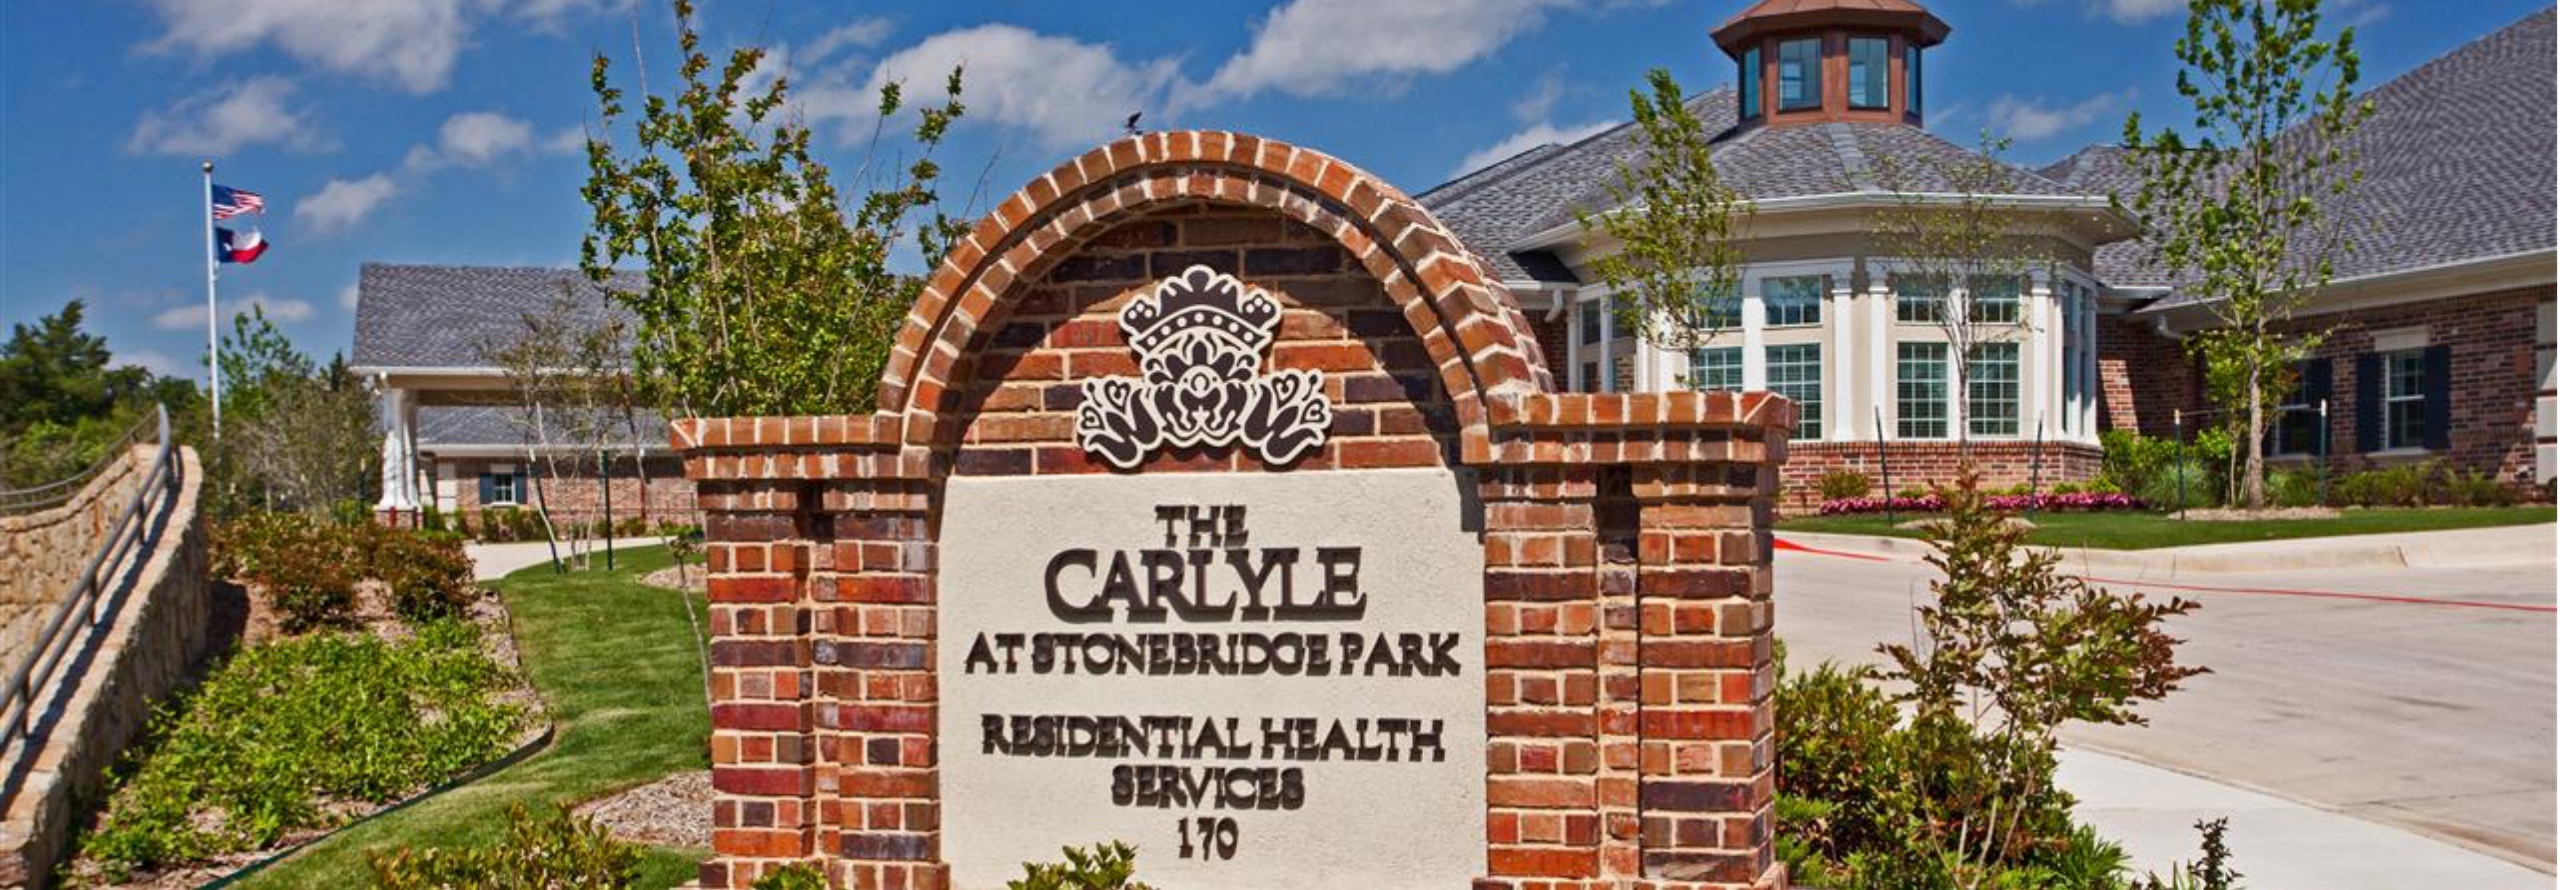 Main entrance of The Carlyle at Stonebridge Park